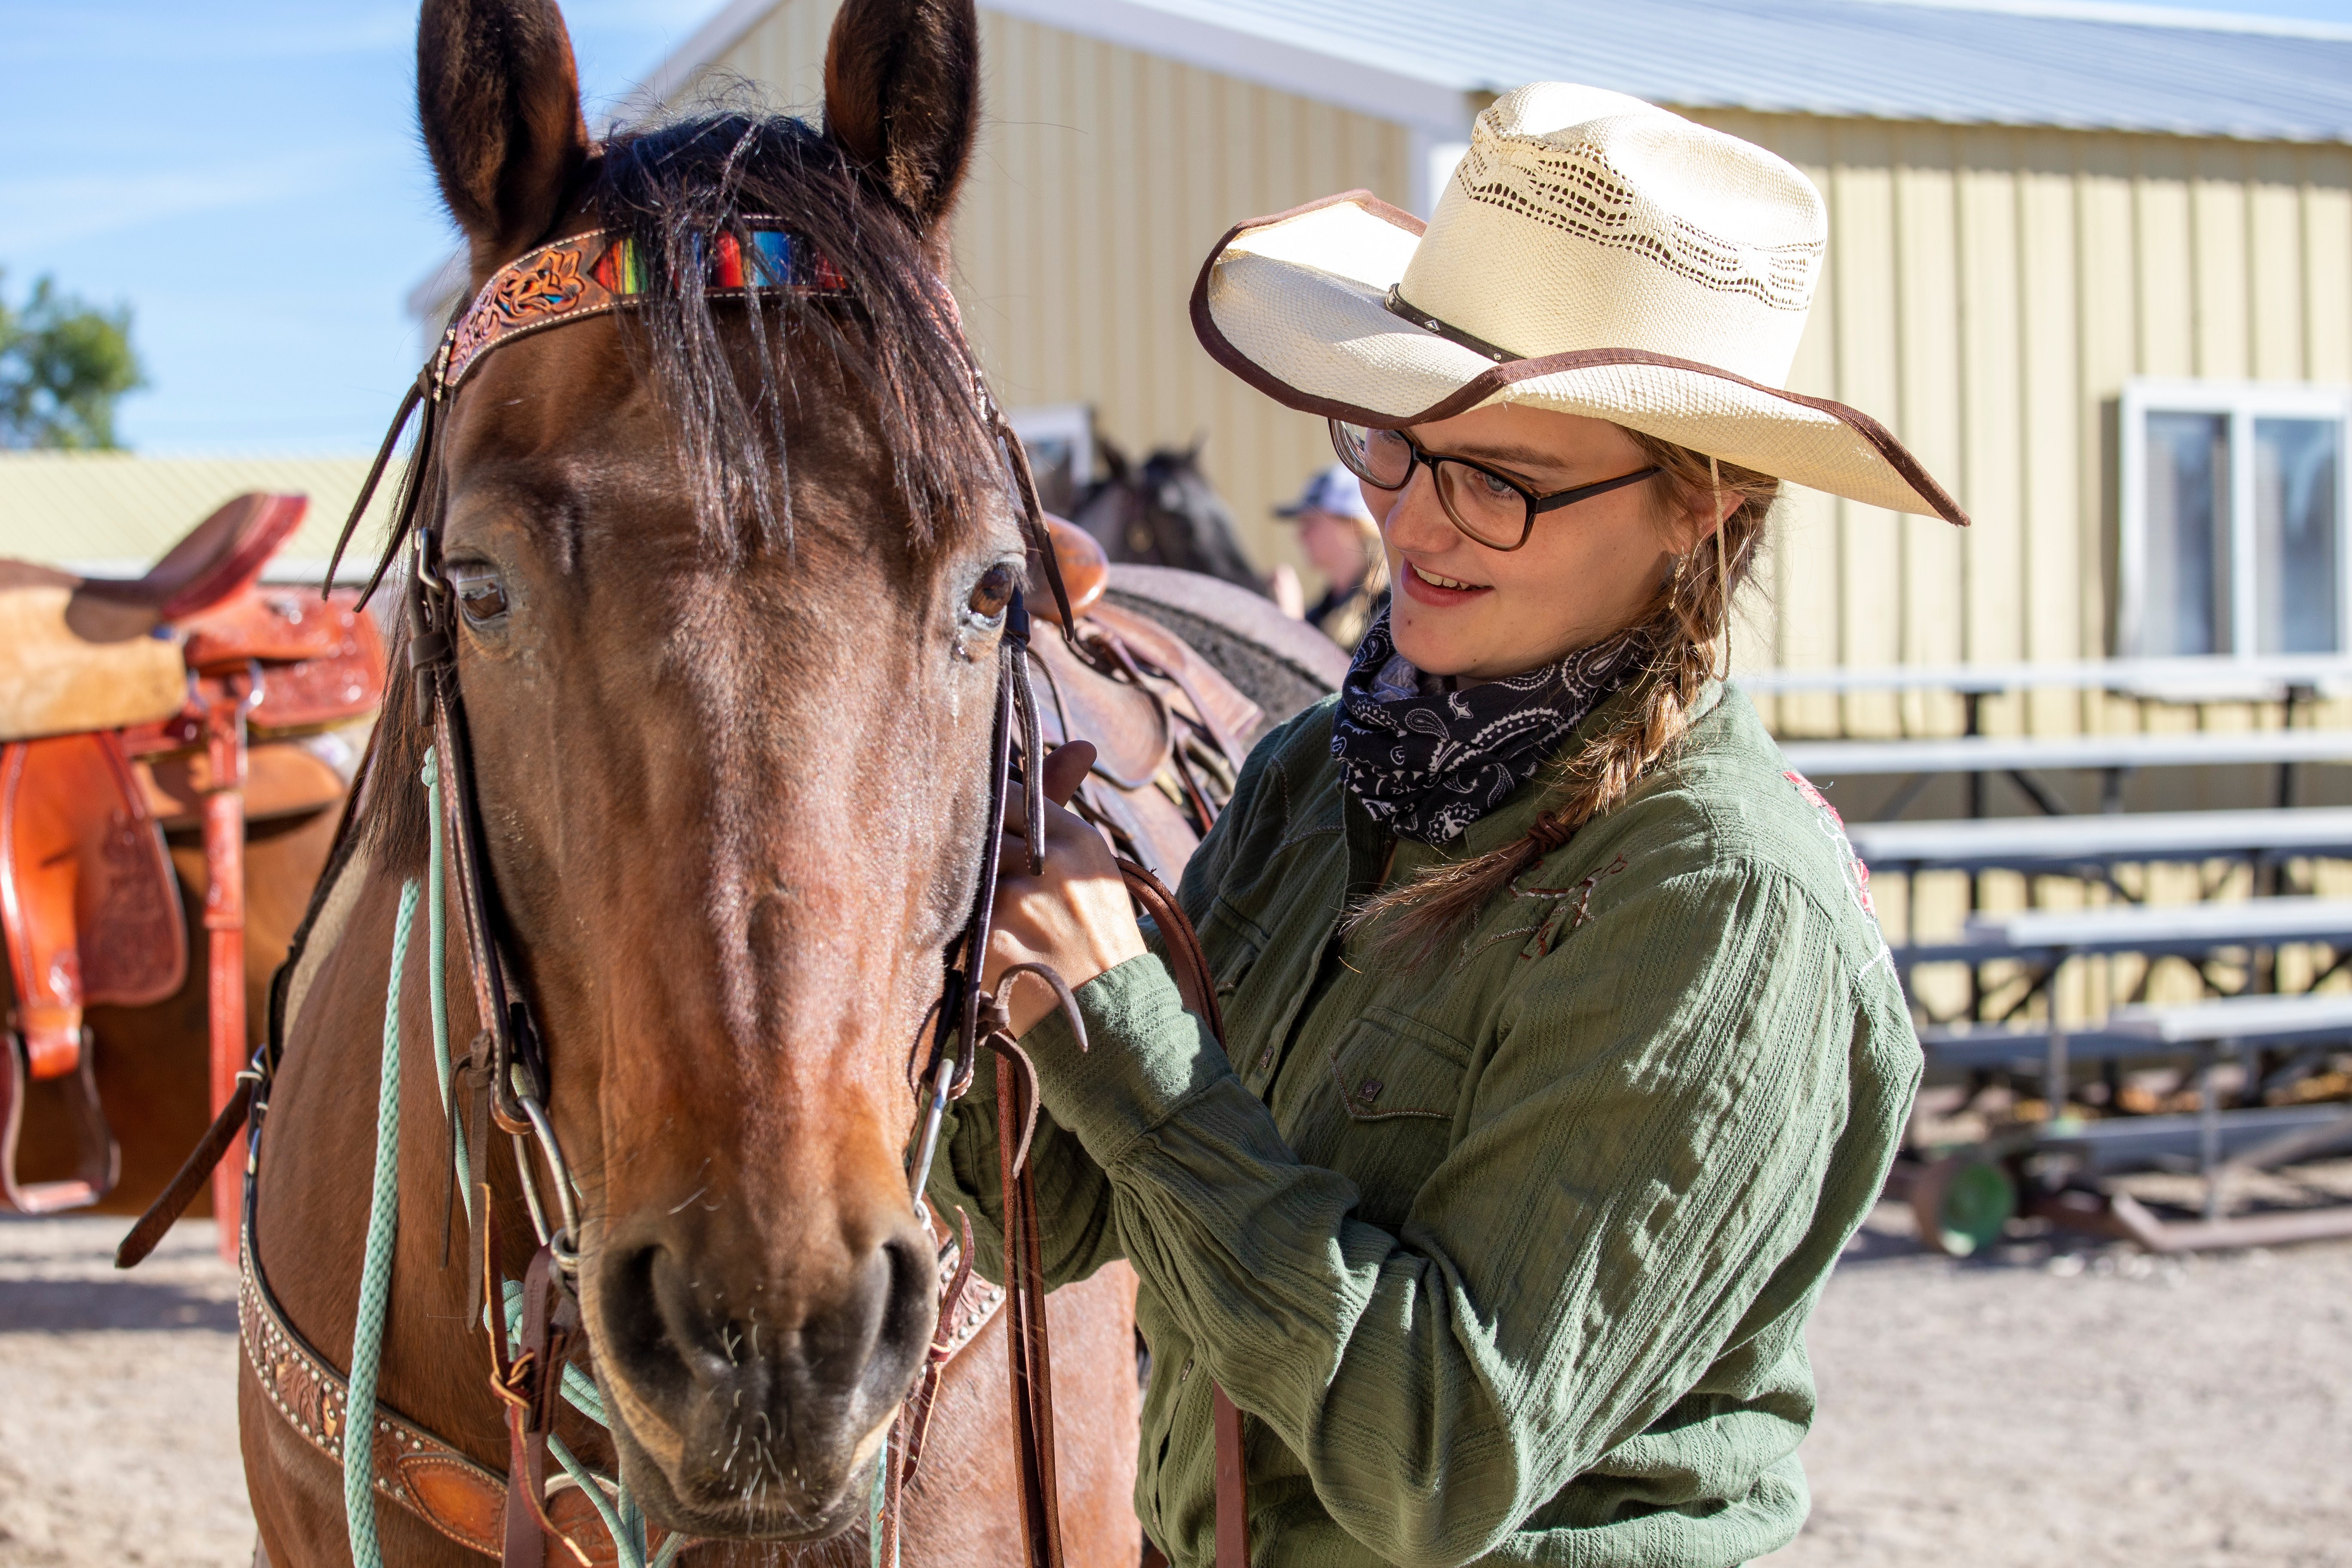 Girl in cowboy hat and green shirt with brown hair petting a brown horse